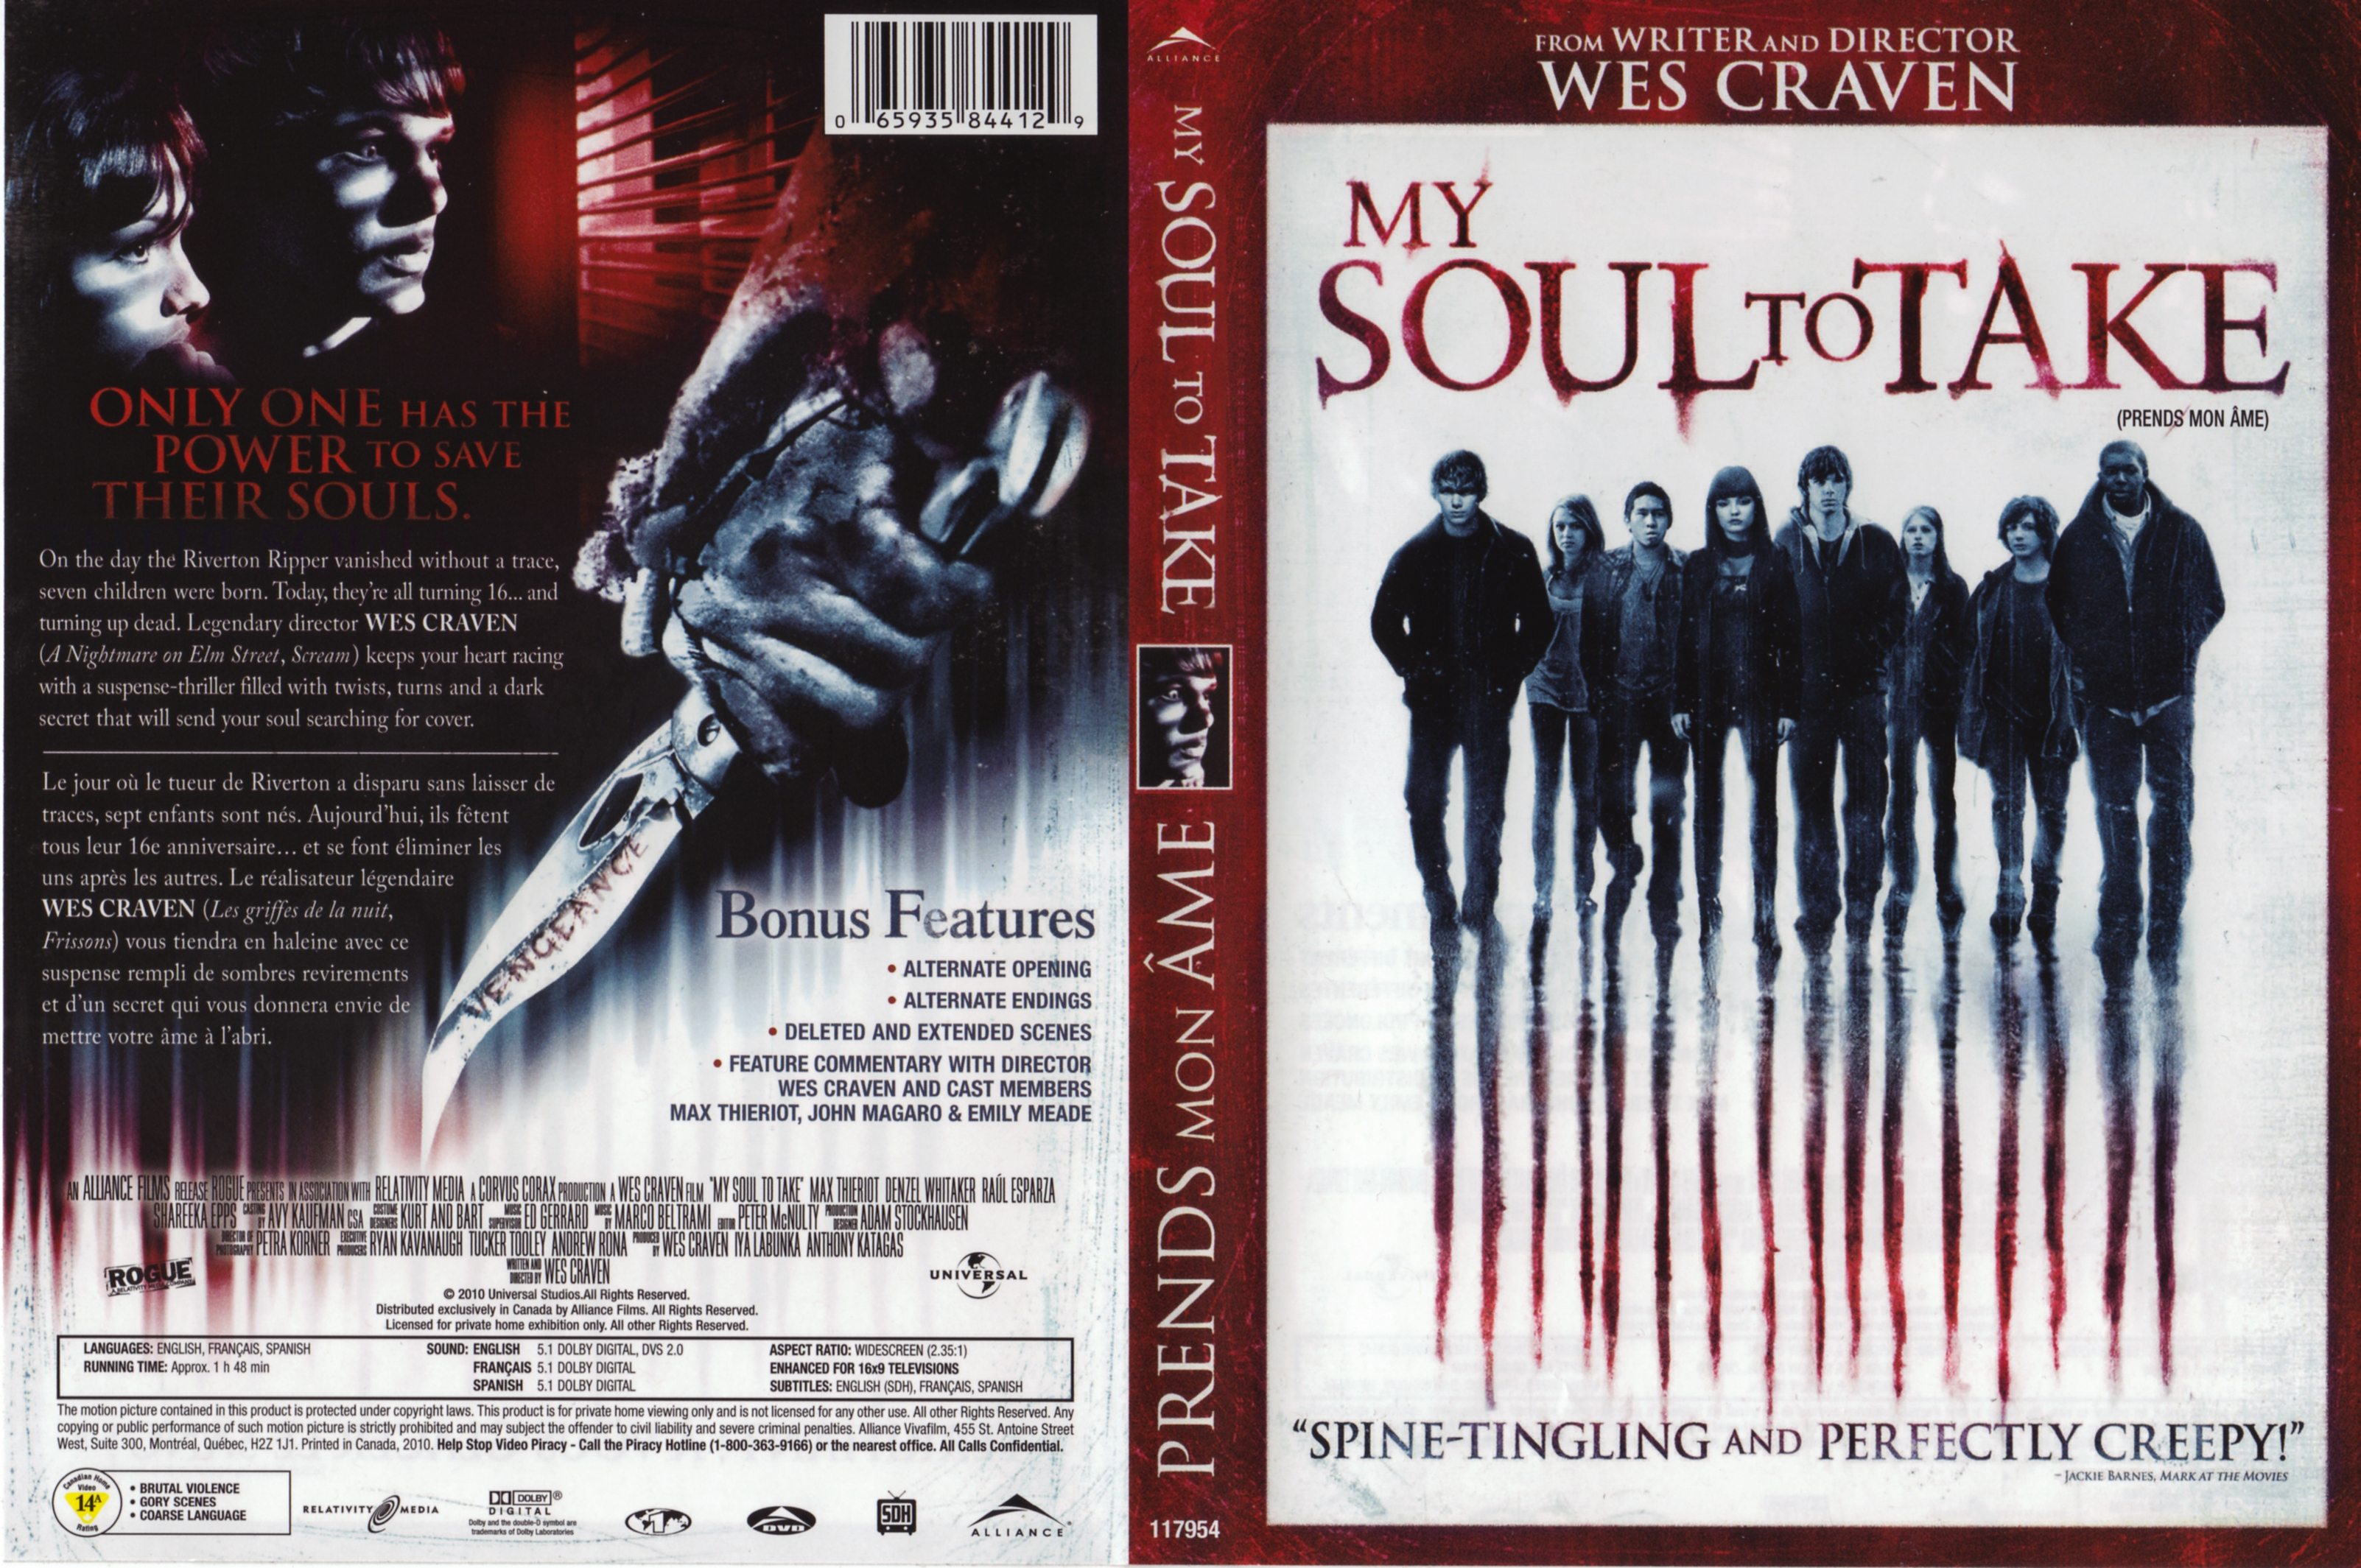 Jaquette DVD My soul to take - Prends mon me (Canadienne)